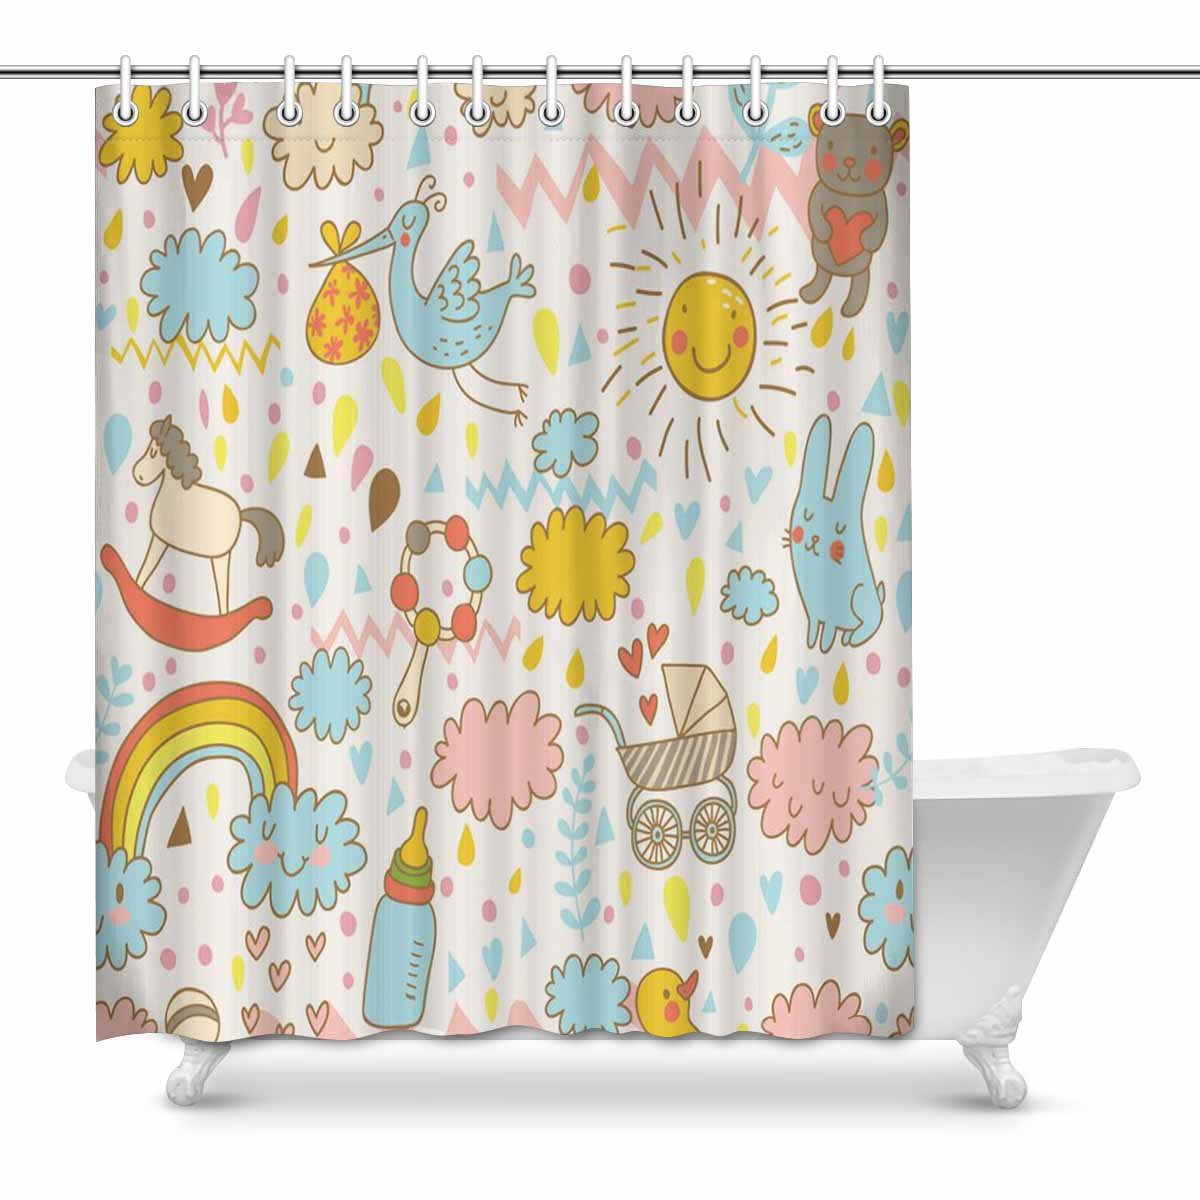 Details about   Pink Alpaca and Cactus Shower Curtain Bathroom Decor Fabric & 12hooks 71" 